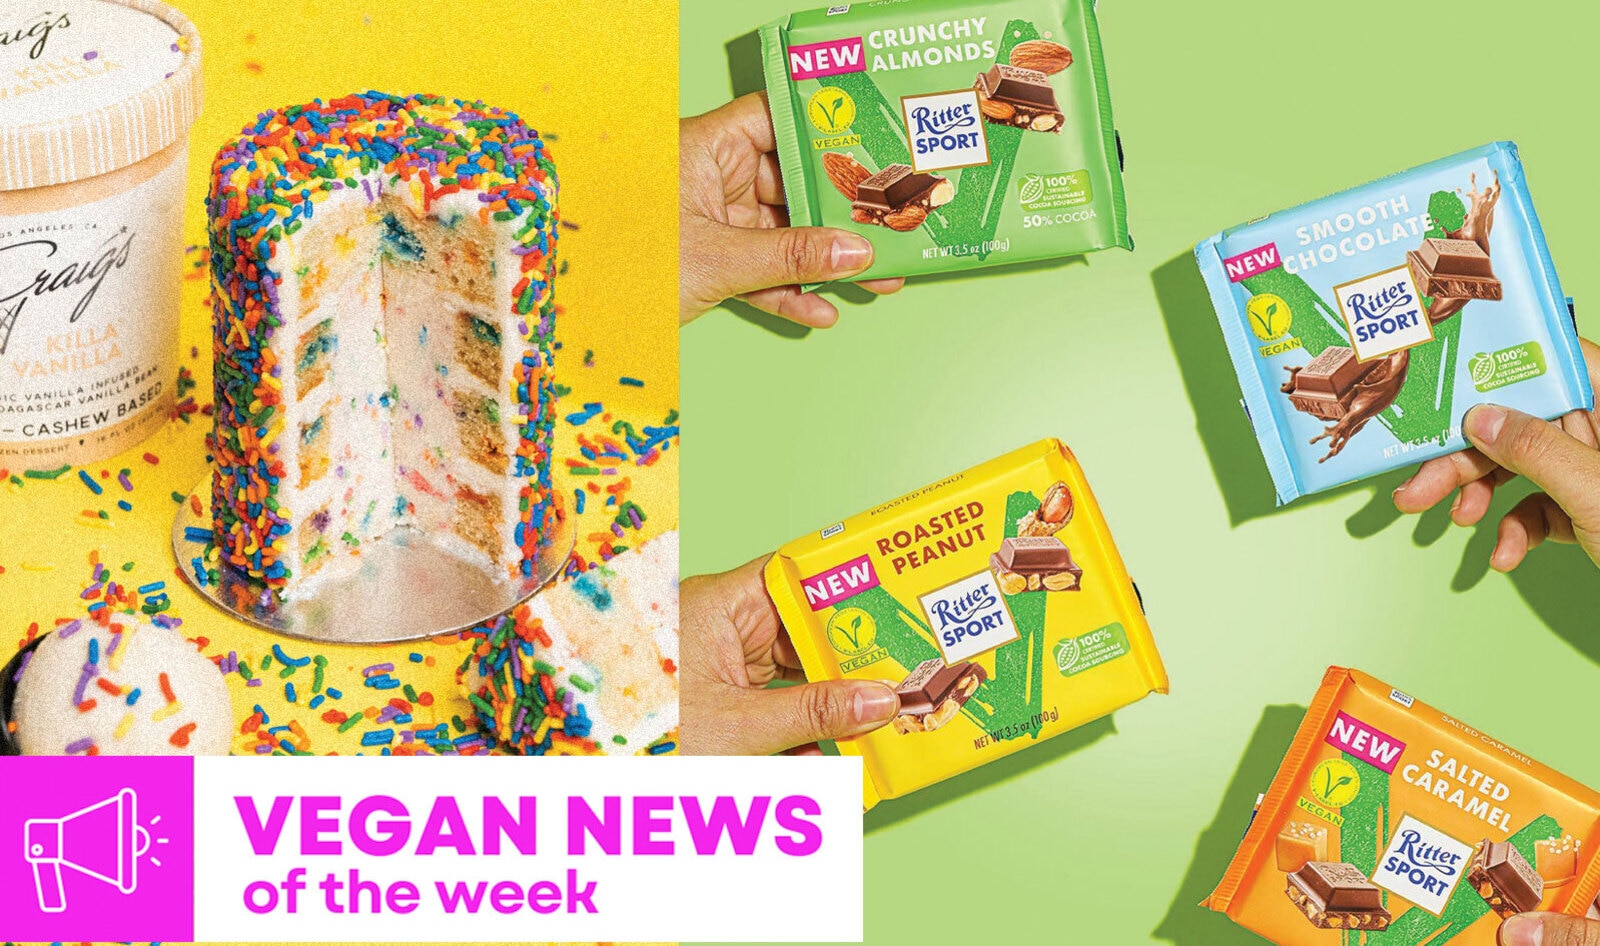 Vegan Food News of the Week: 4 Ritter Sport Chocolates, Ice Cream Cake, and More